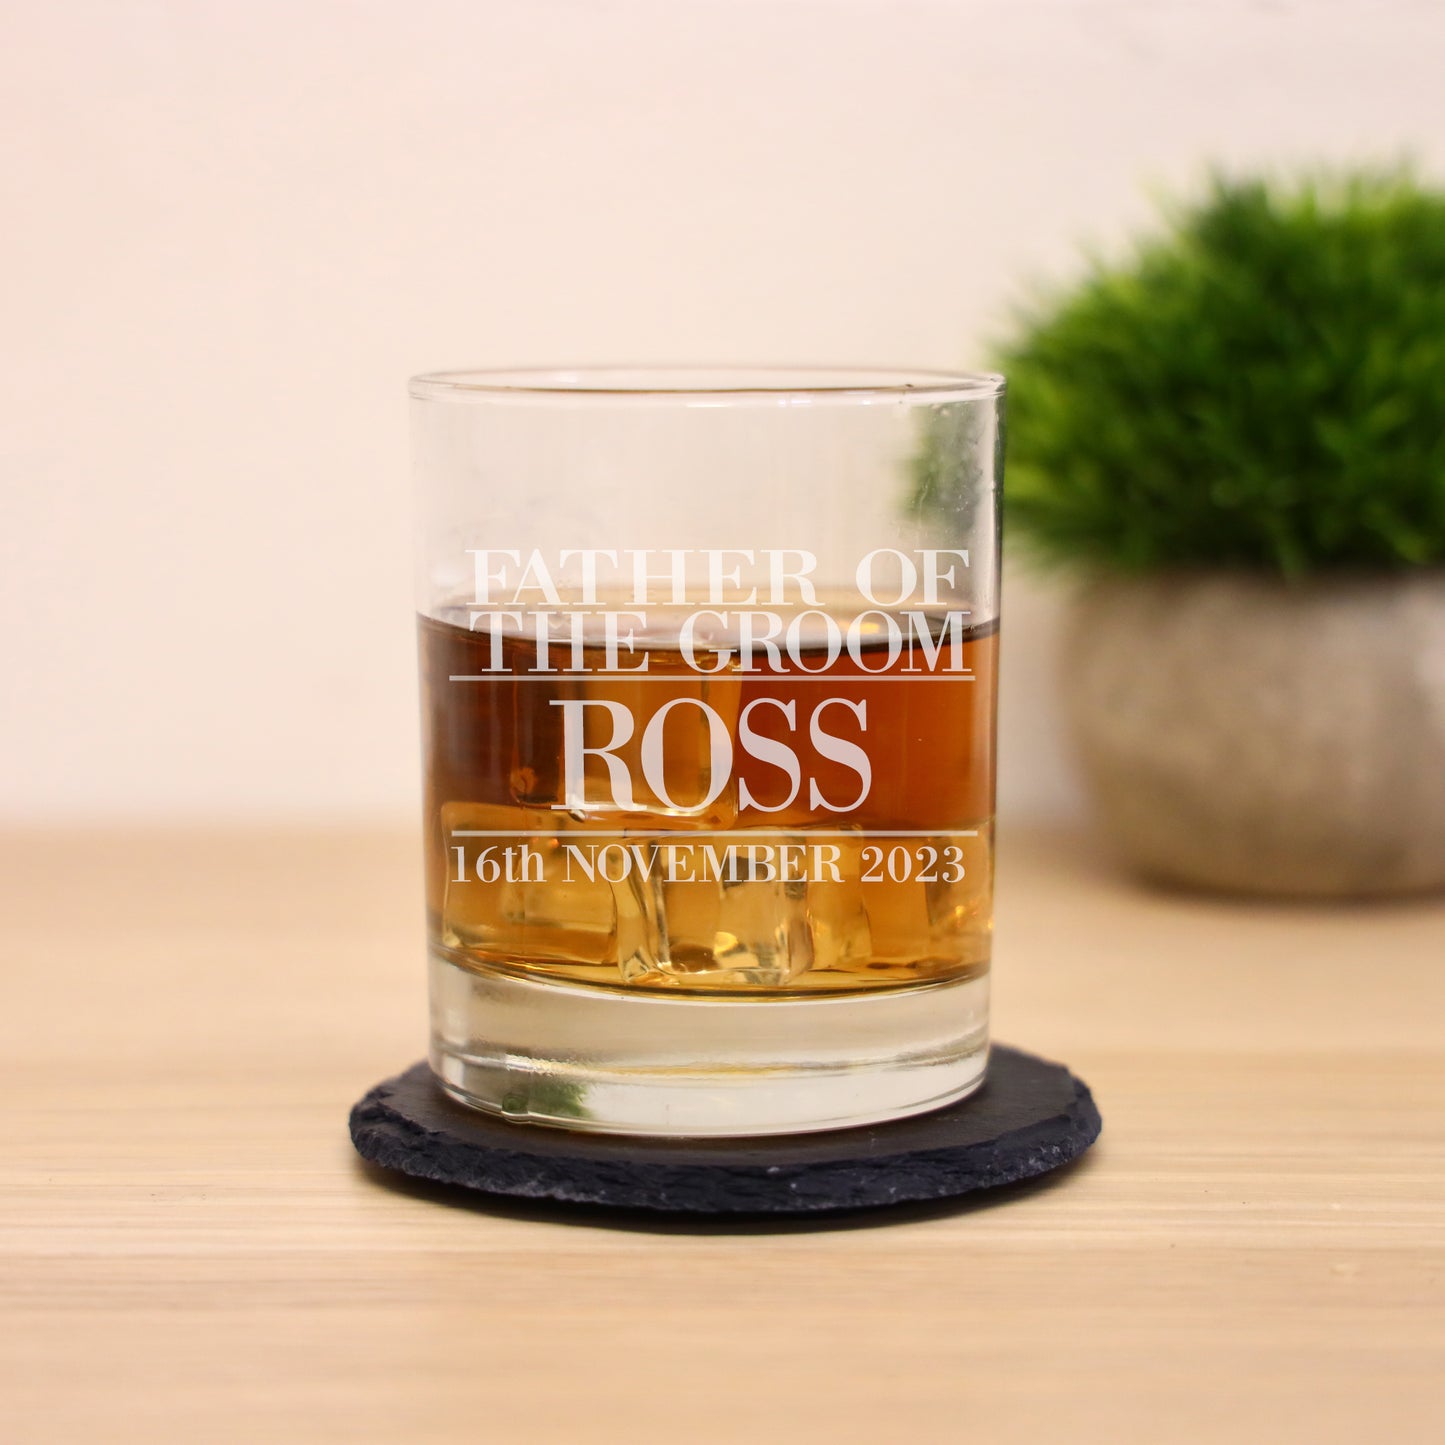 Personalised Father Of The Groom Whisky Glass and/or Coaster Set  - Always Looking Good -   